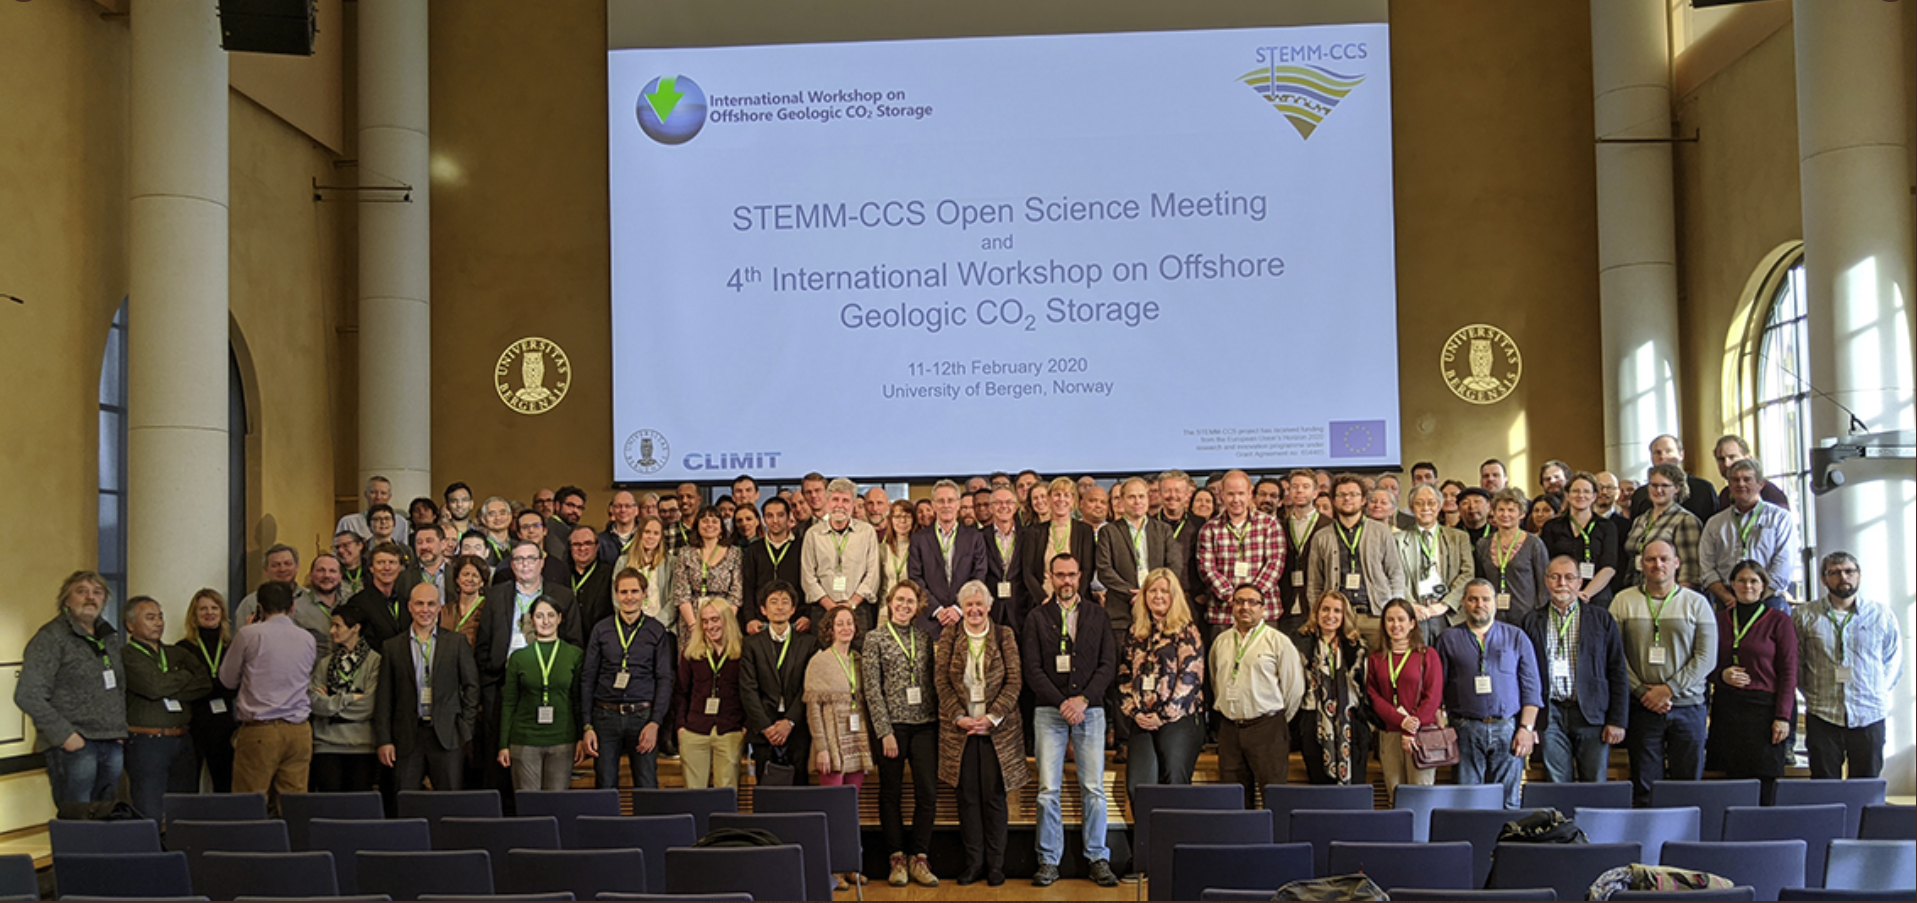 photo of all participants, around 150, at the stem-ccs conference